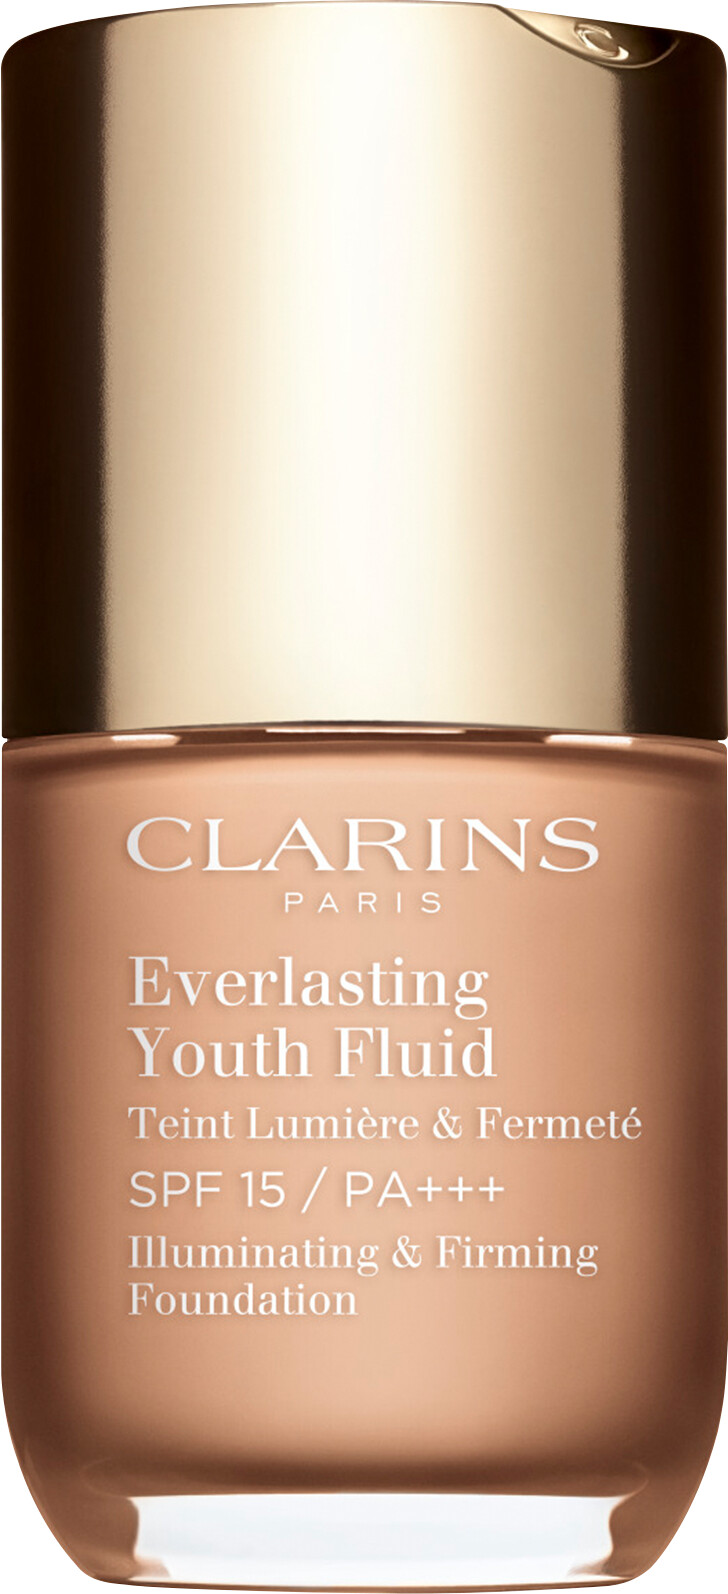 Clarins Everlasting Youth Fluid Illuminating and Firming Foundation SPF15 30ml 107 - Beige